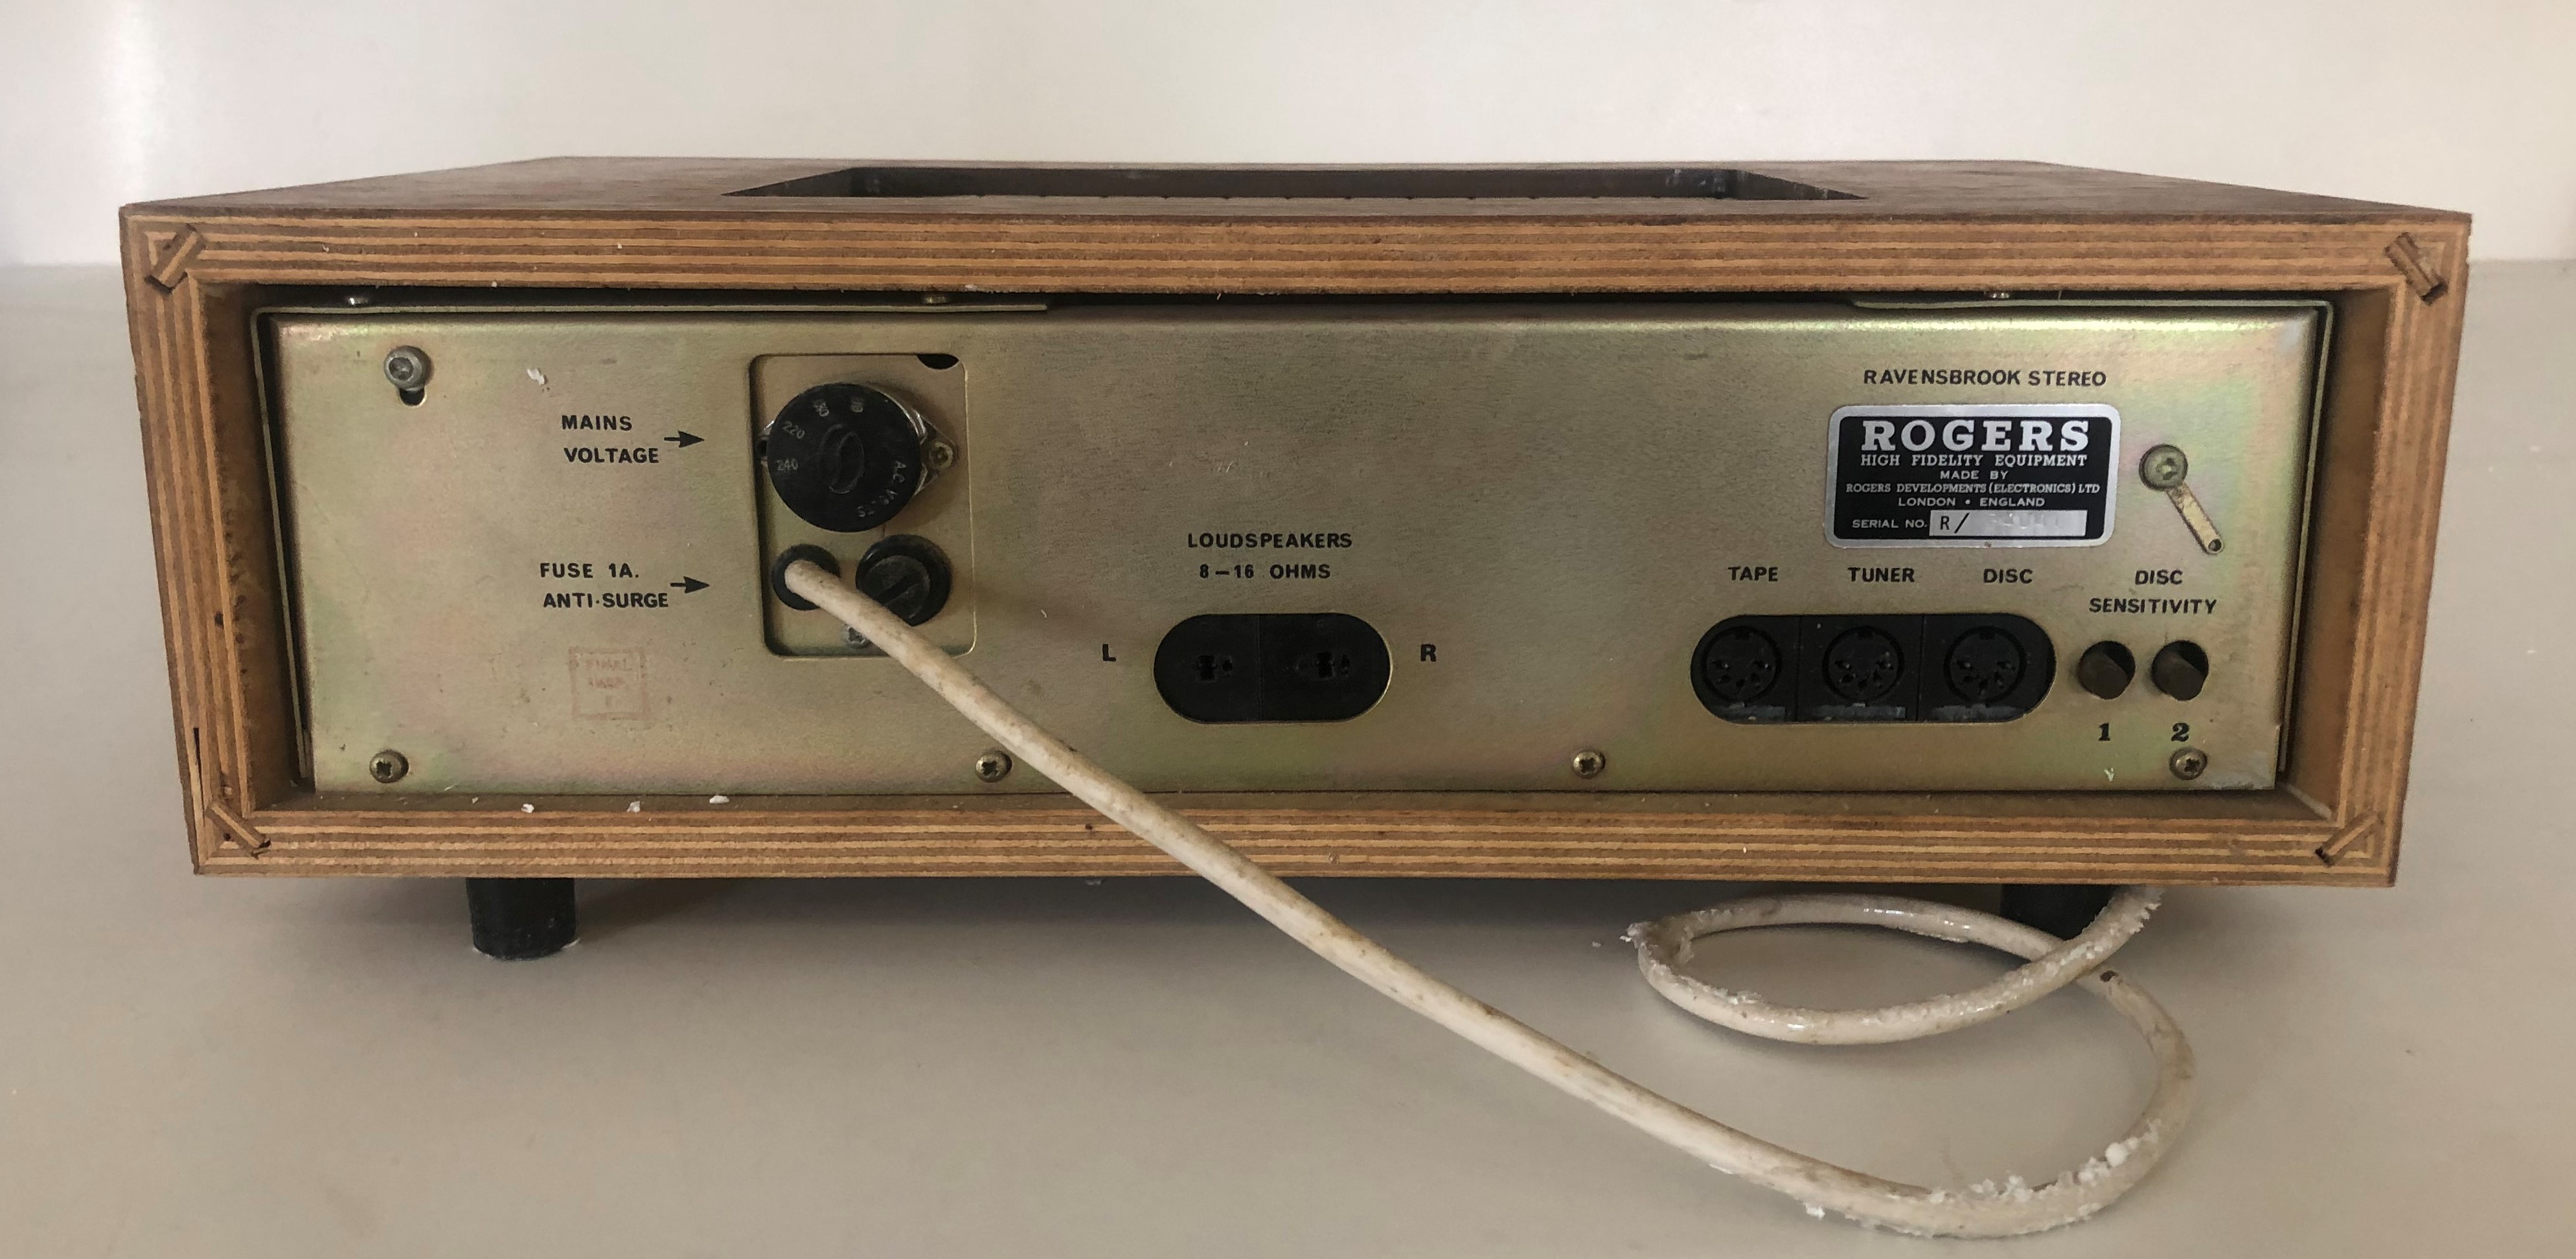 ROGERS RAVENSBROOK STEREO AMPLIFIER. An original Rogers amplifier with original box. - Image 3 of 3